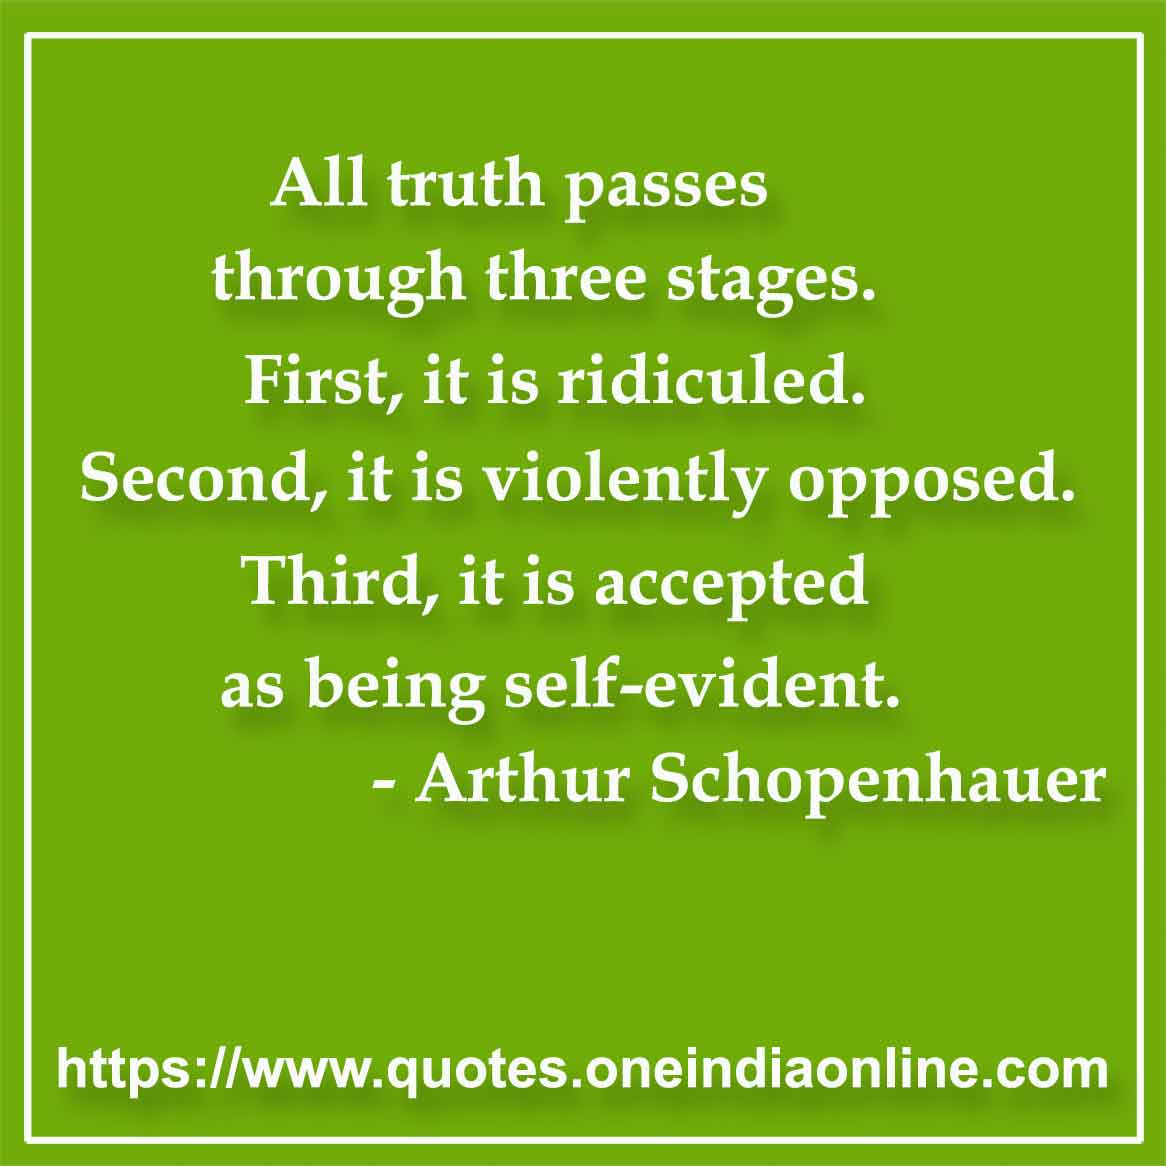 All truth passes through three stages. First, it is ridiculed. Second, it is violently opposed. Third, it is accepted as being self-evident.

- Truth Quotes by Arthur Schopenhauer 